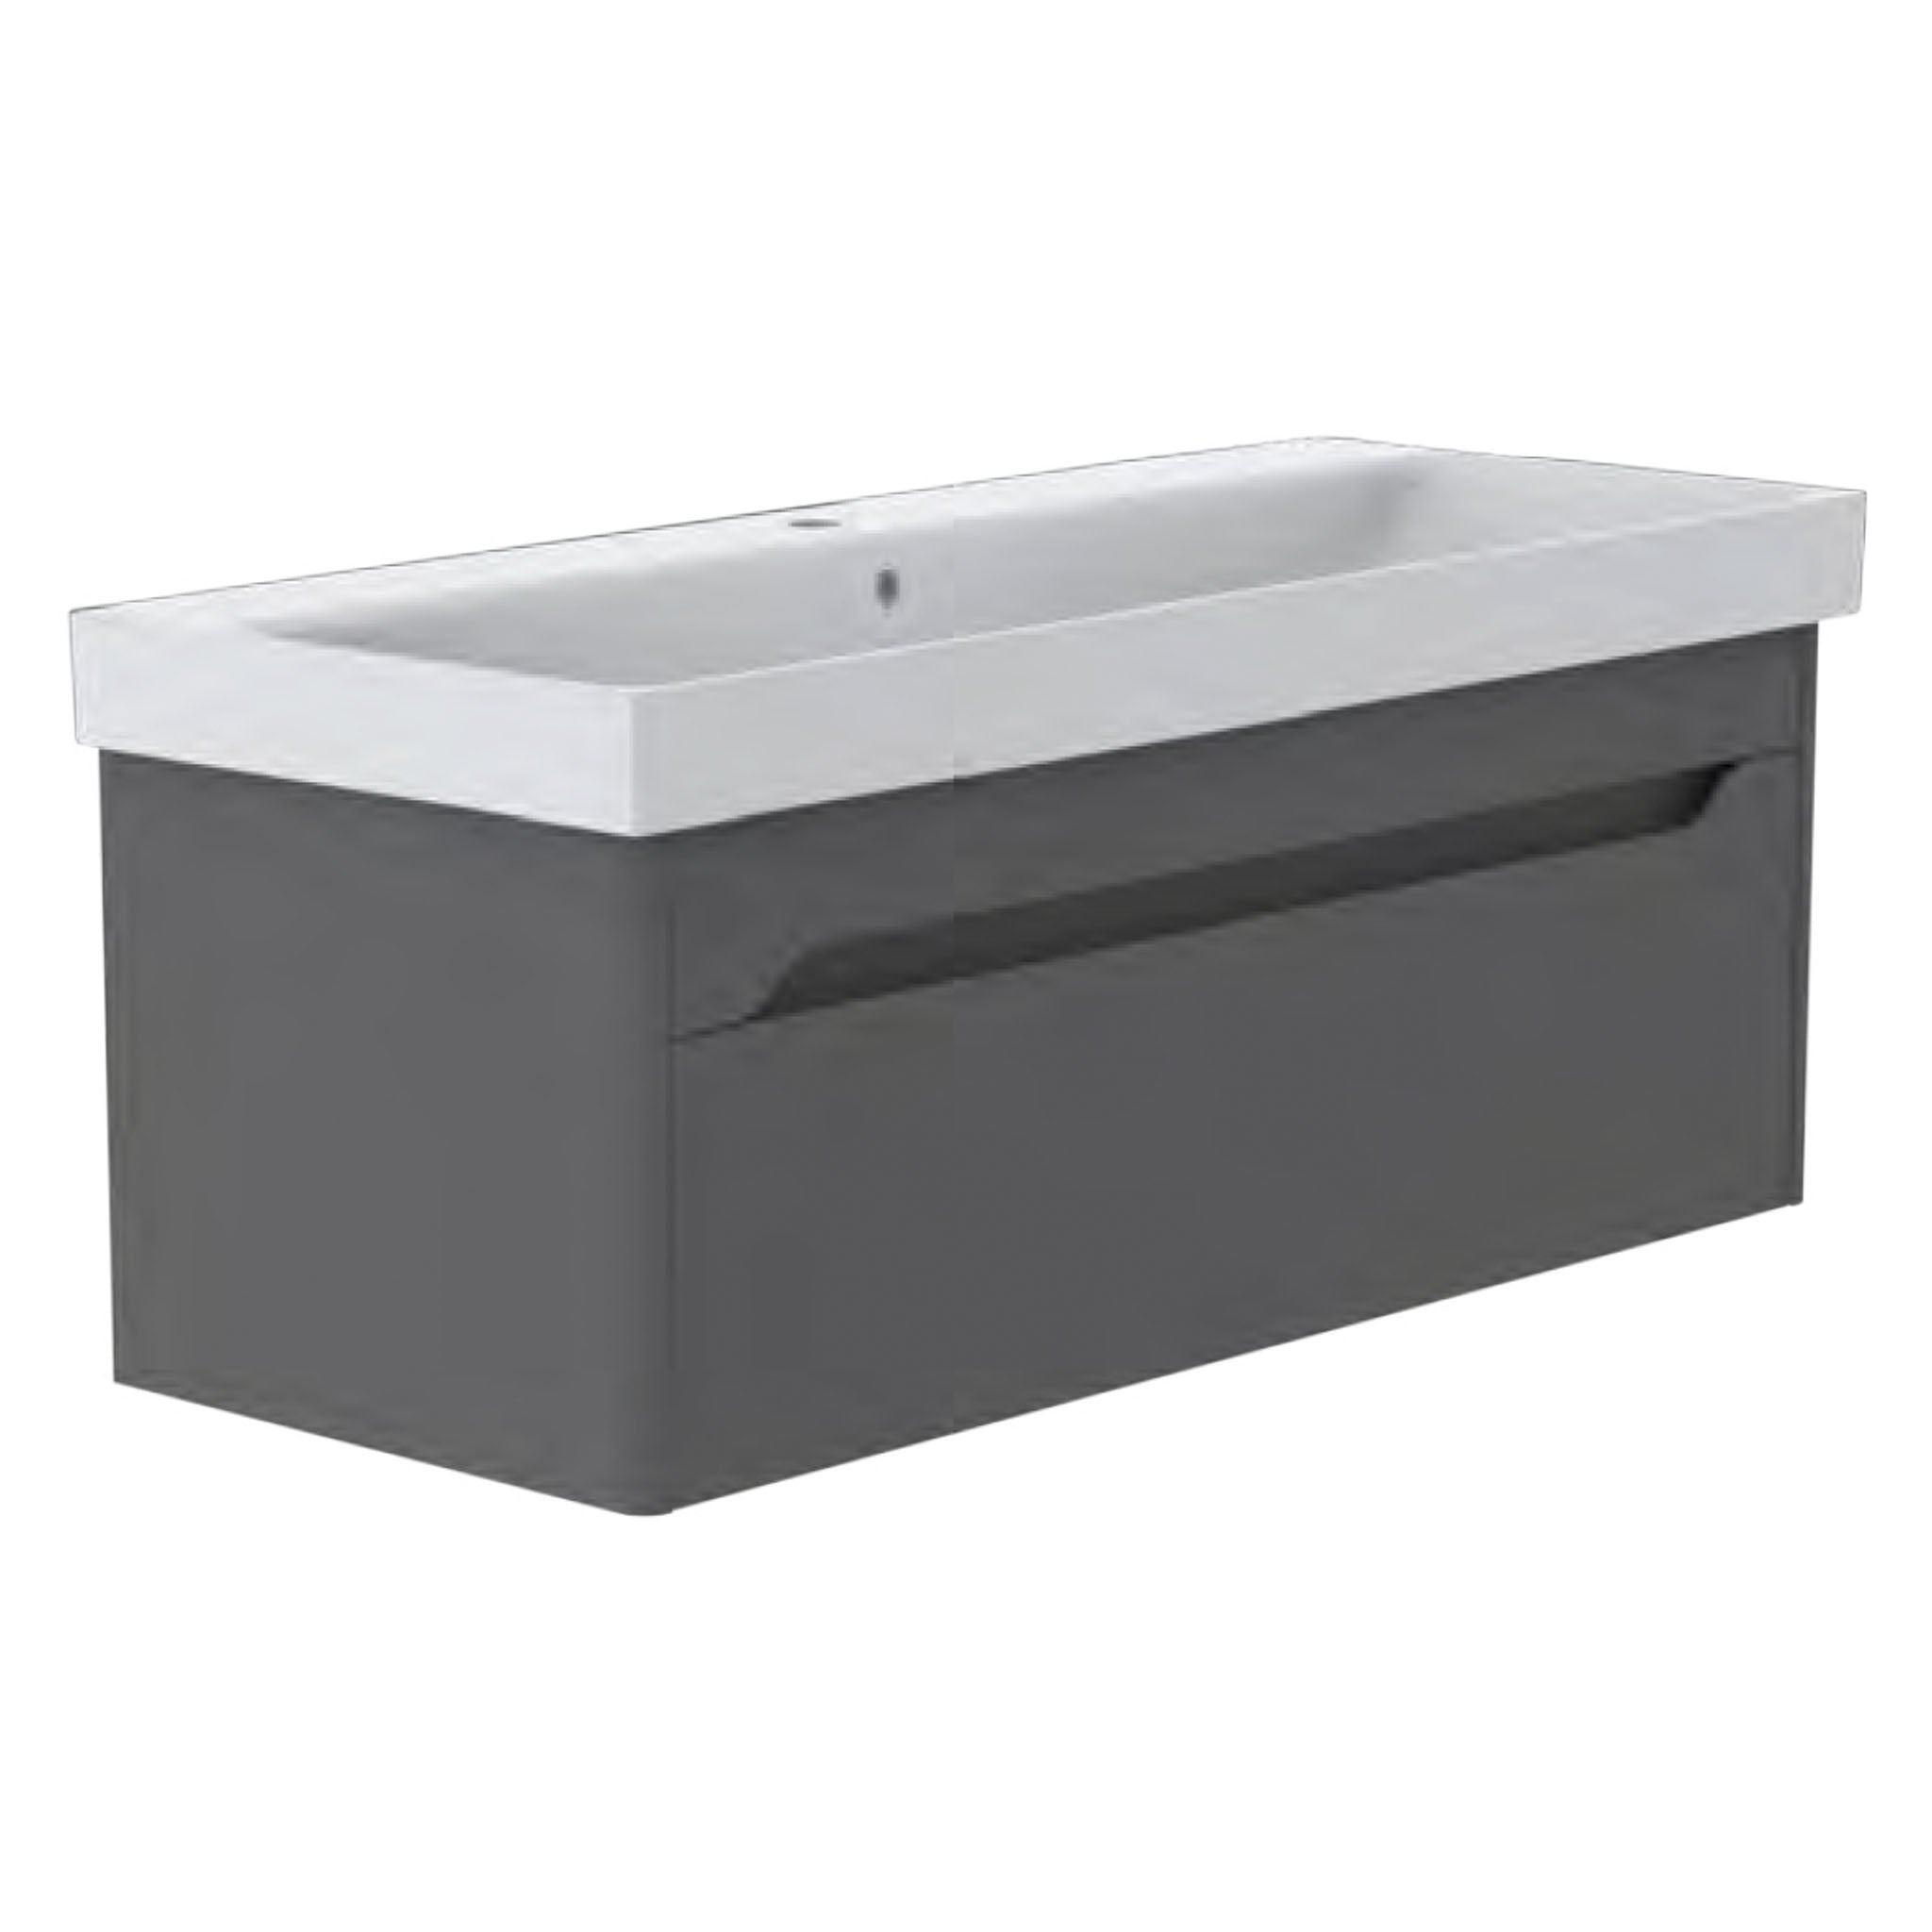 GSI Nubes Lacquer 120 x 50 1 Drawer Vanity Unit